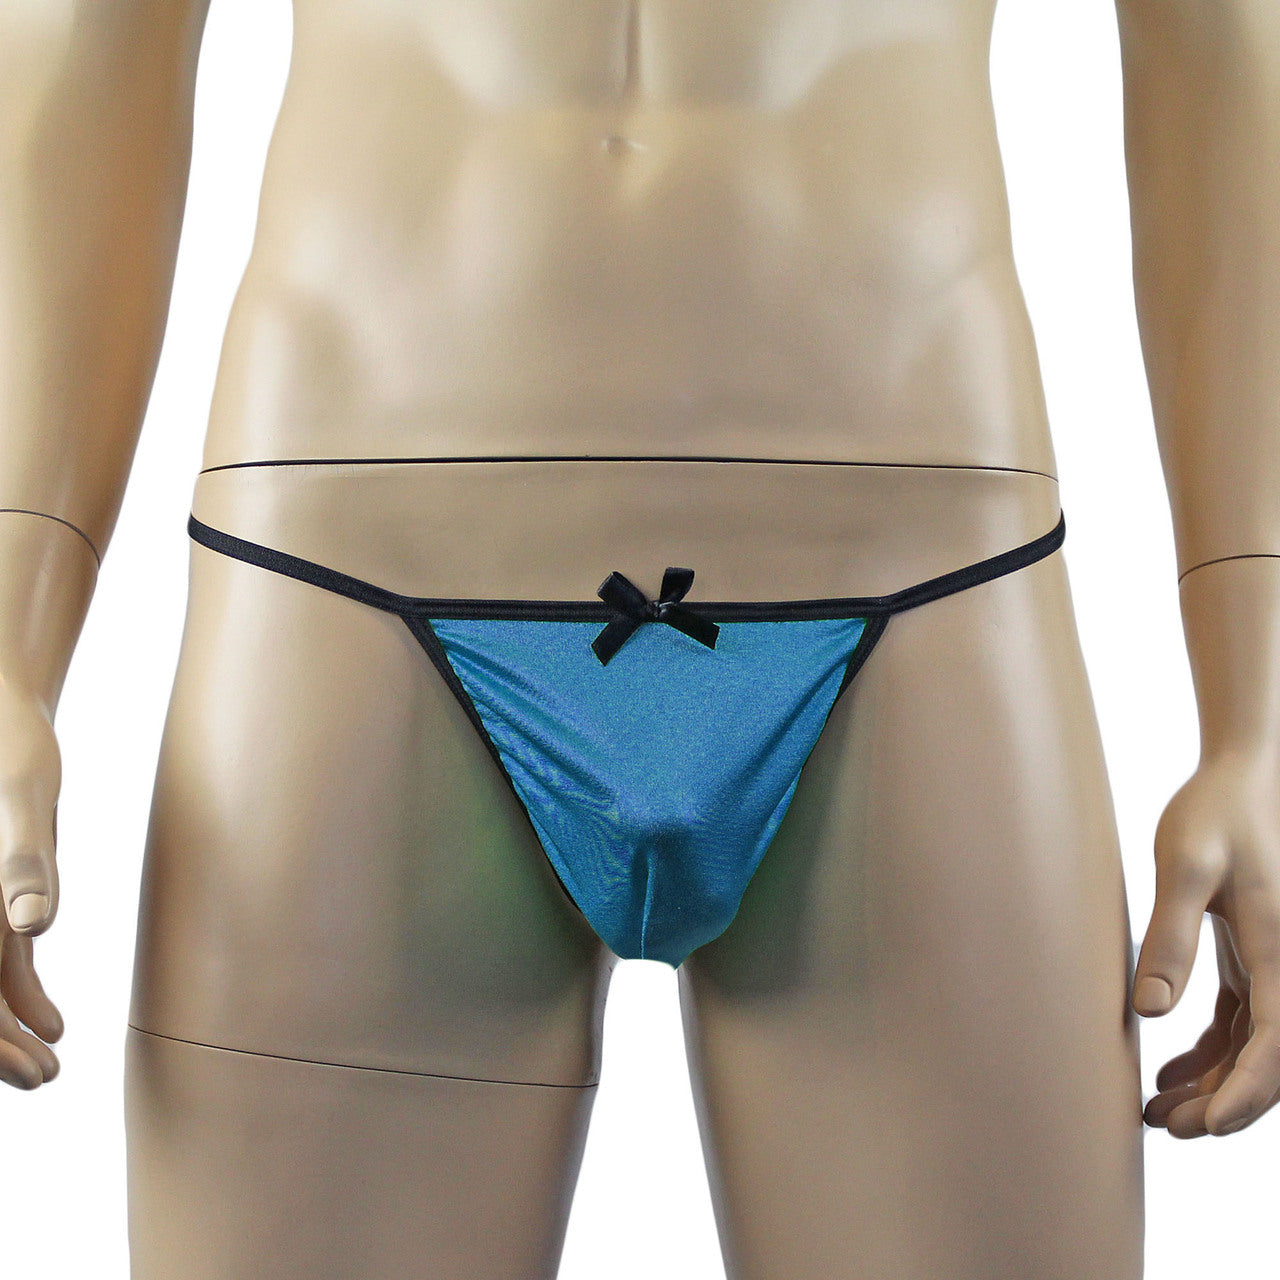 Mens Risque Stretch Satin Pouch G string with Bow Teal